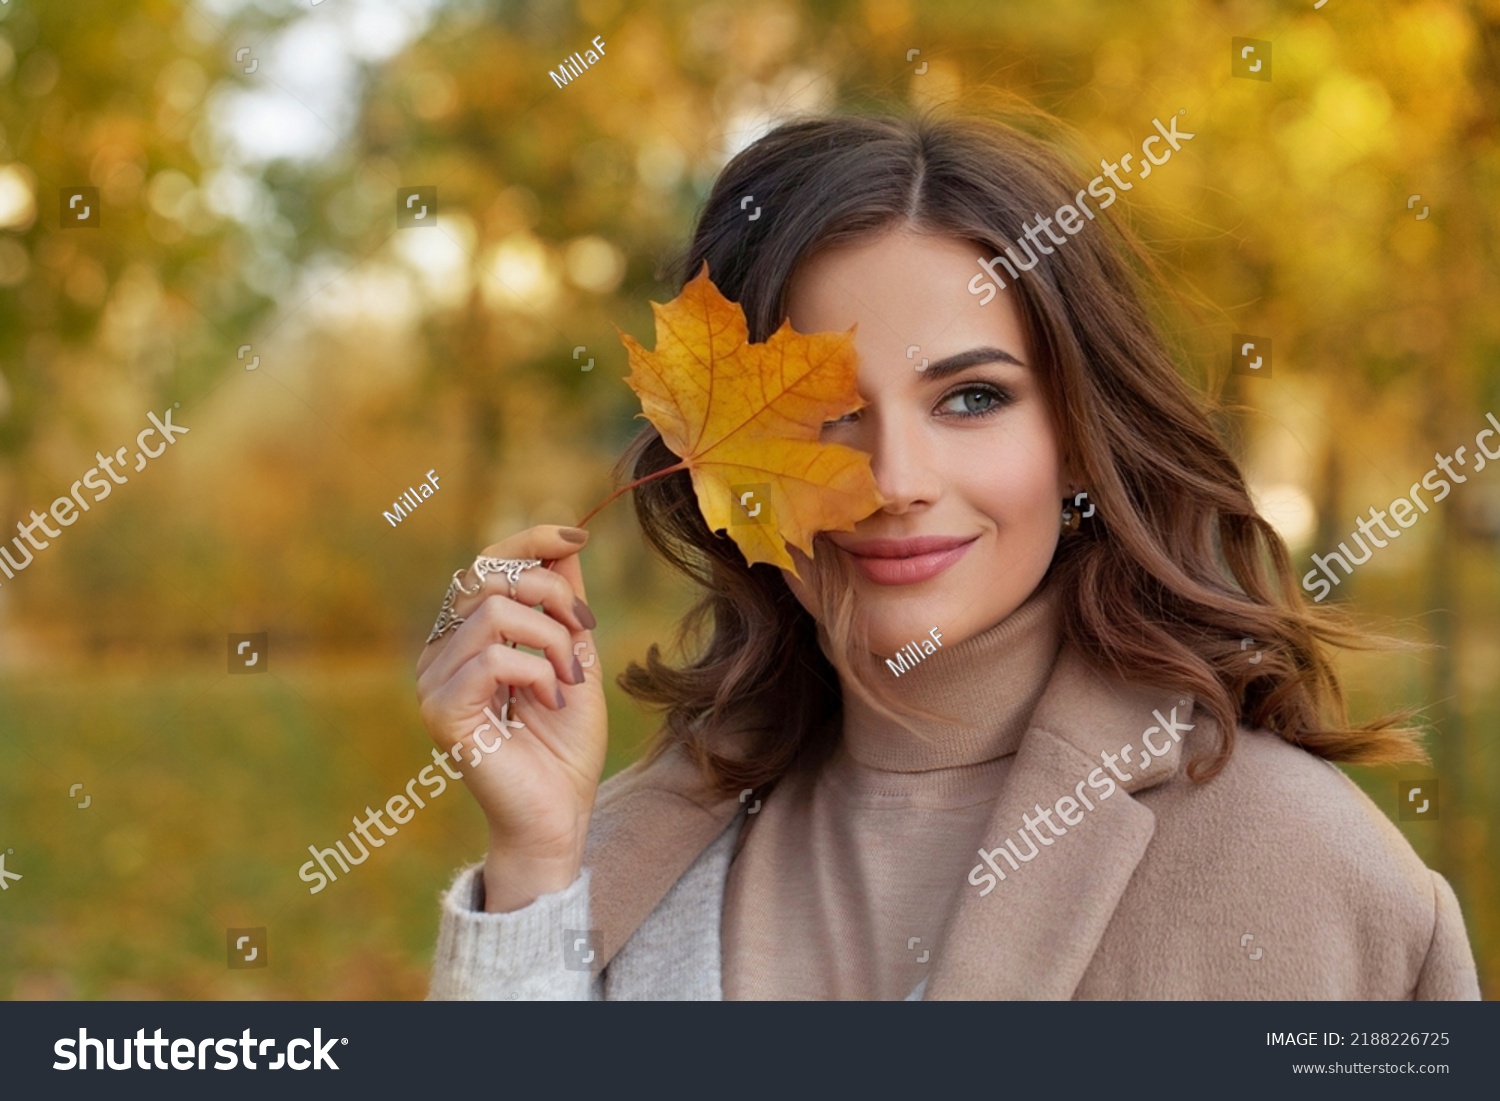 Outdoor atmospheric lifestyle portrait of young beautiful lady. Warm autumn #2188226725